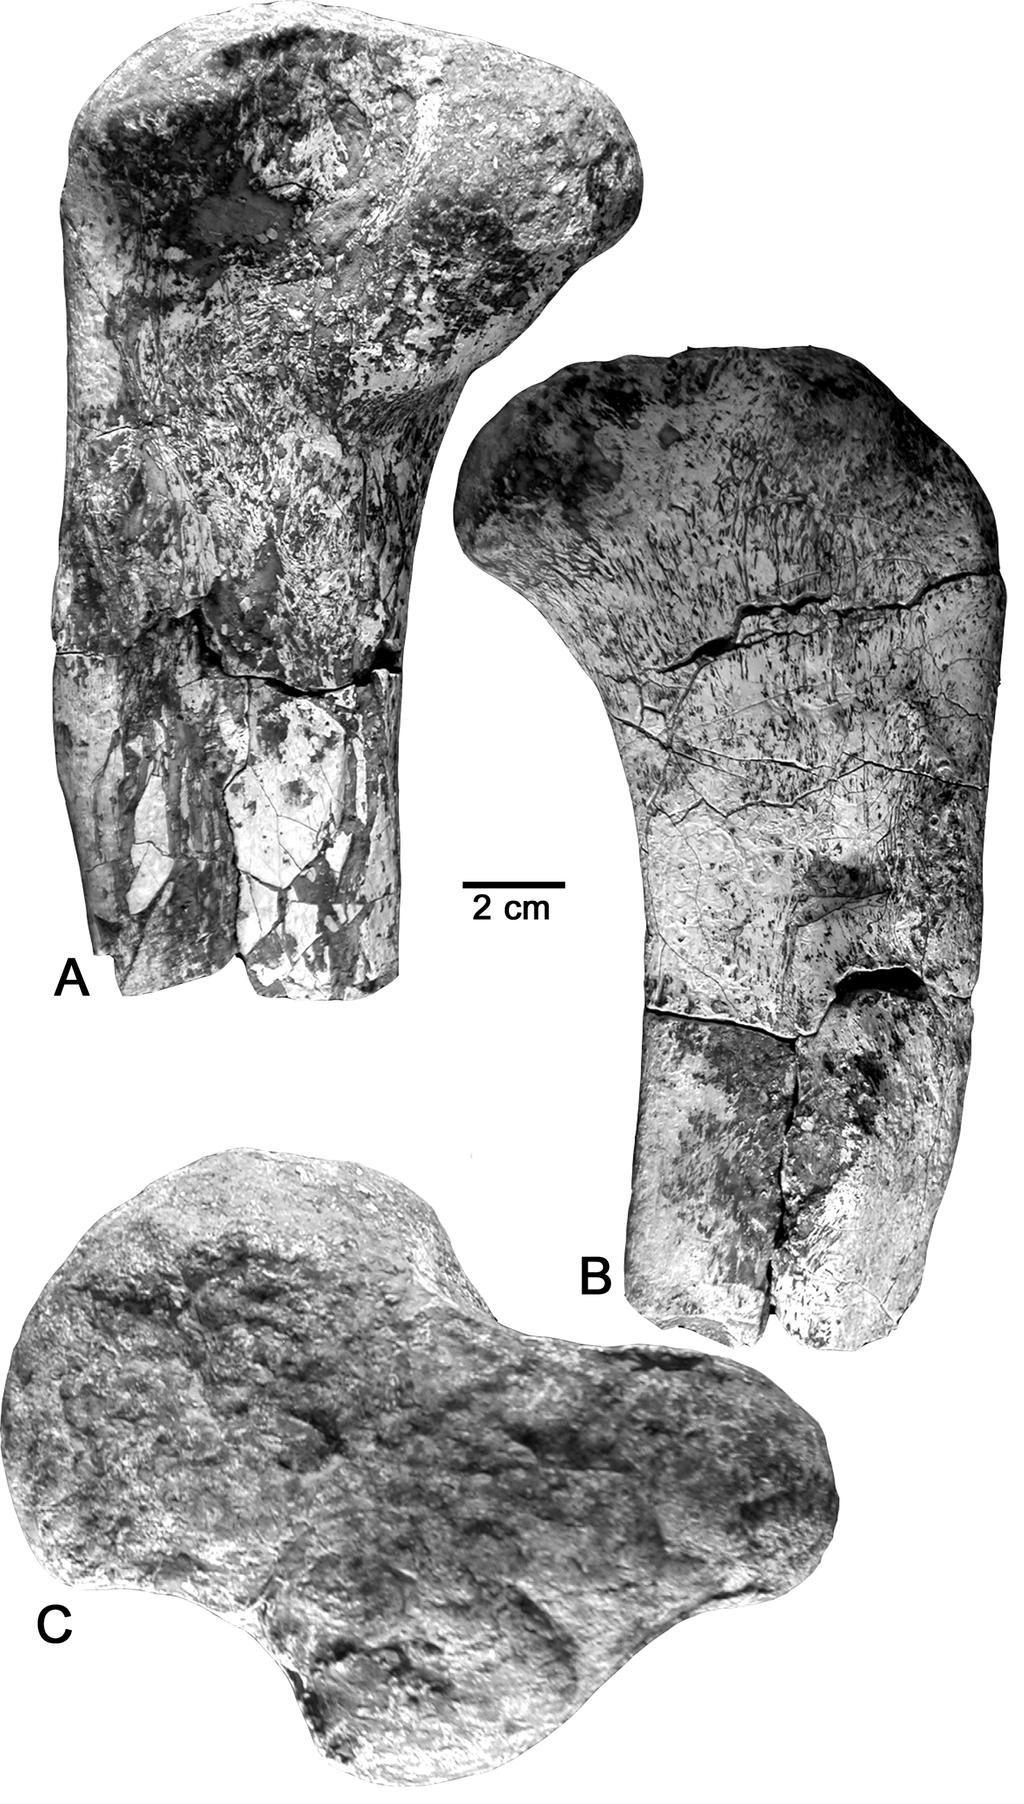 ogy are not due to ontogeny and are thus likely due to species-level differences. At the time of its discovery, Redondasuchus reseri was the smallest documented aetosaur from the American Southwest.